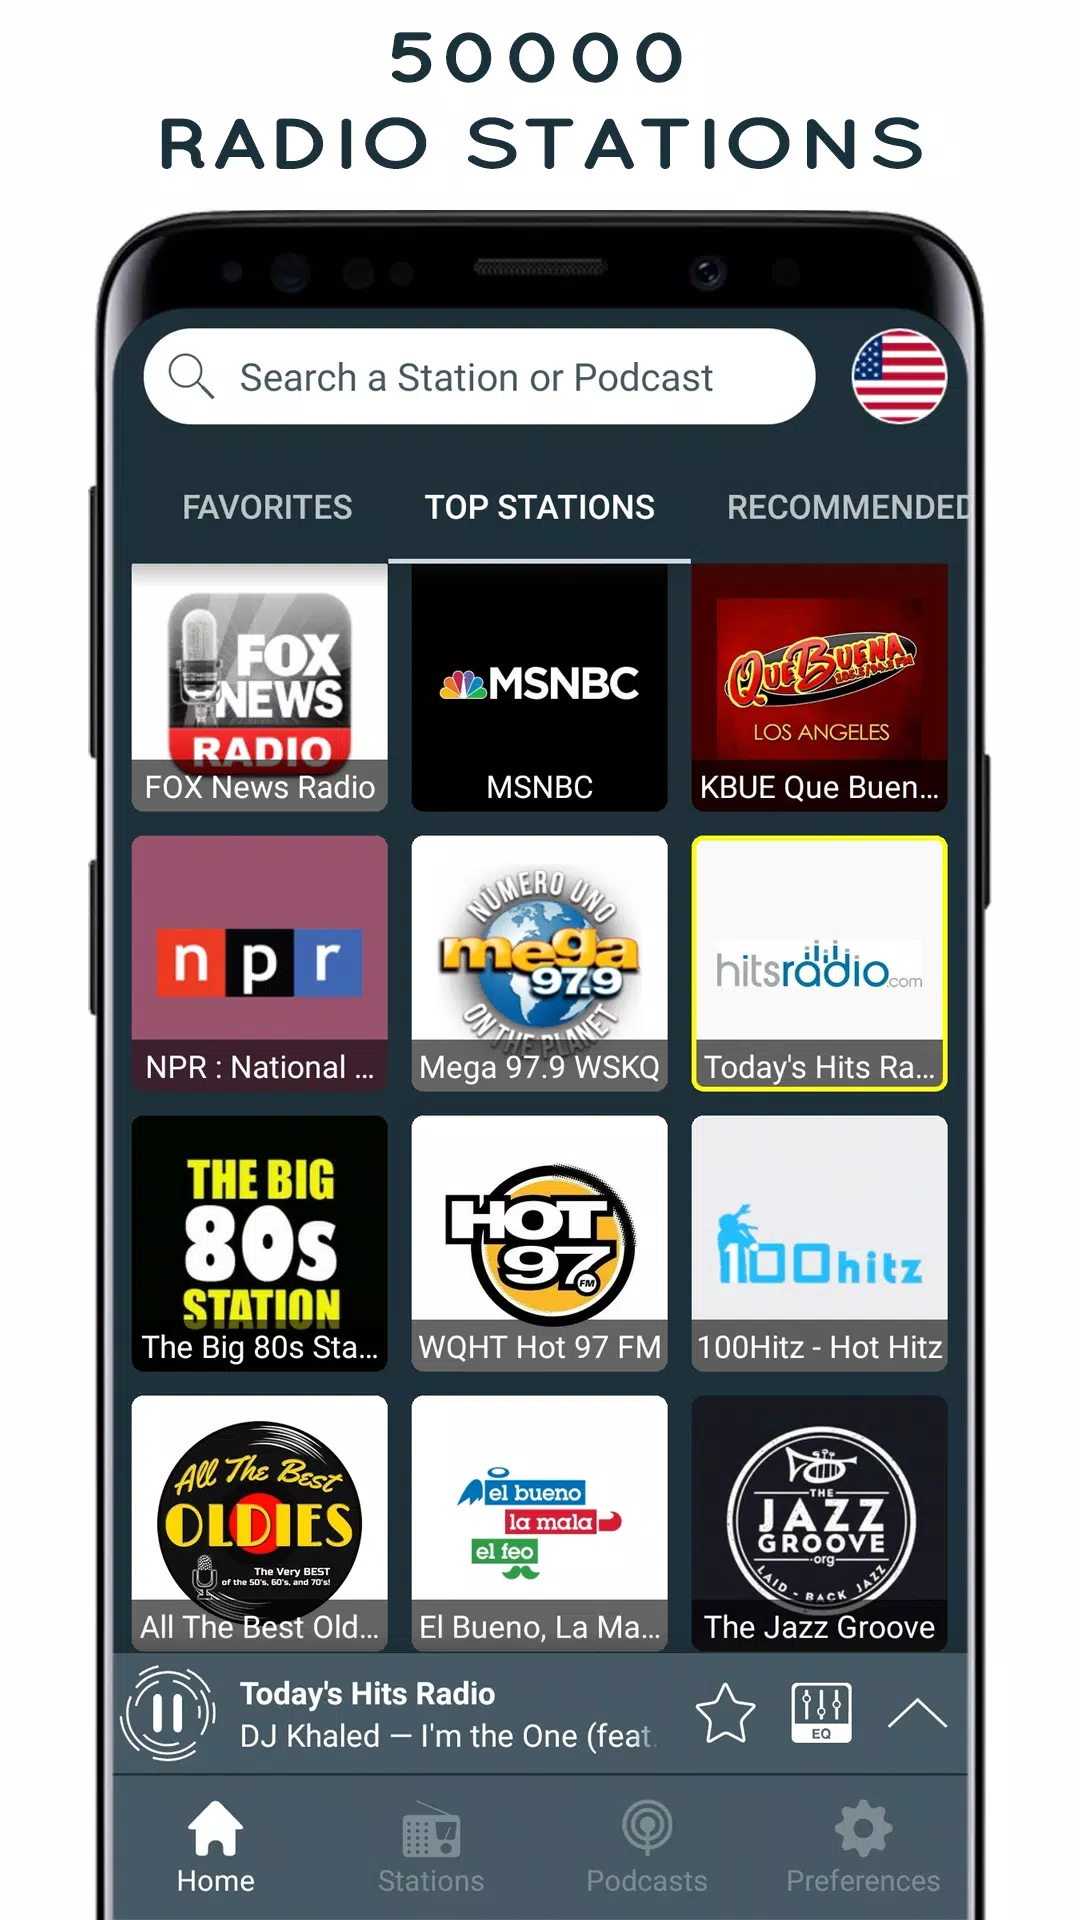 Radio for Android - APK Download